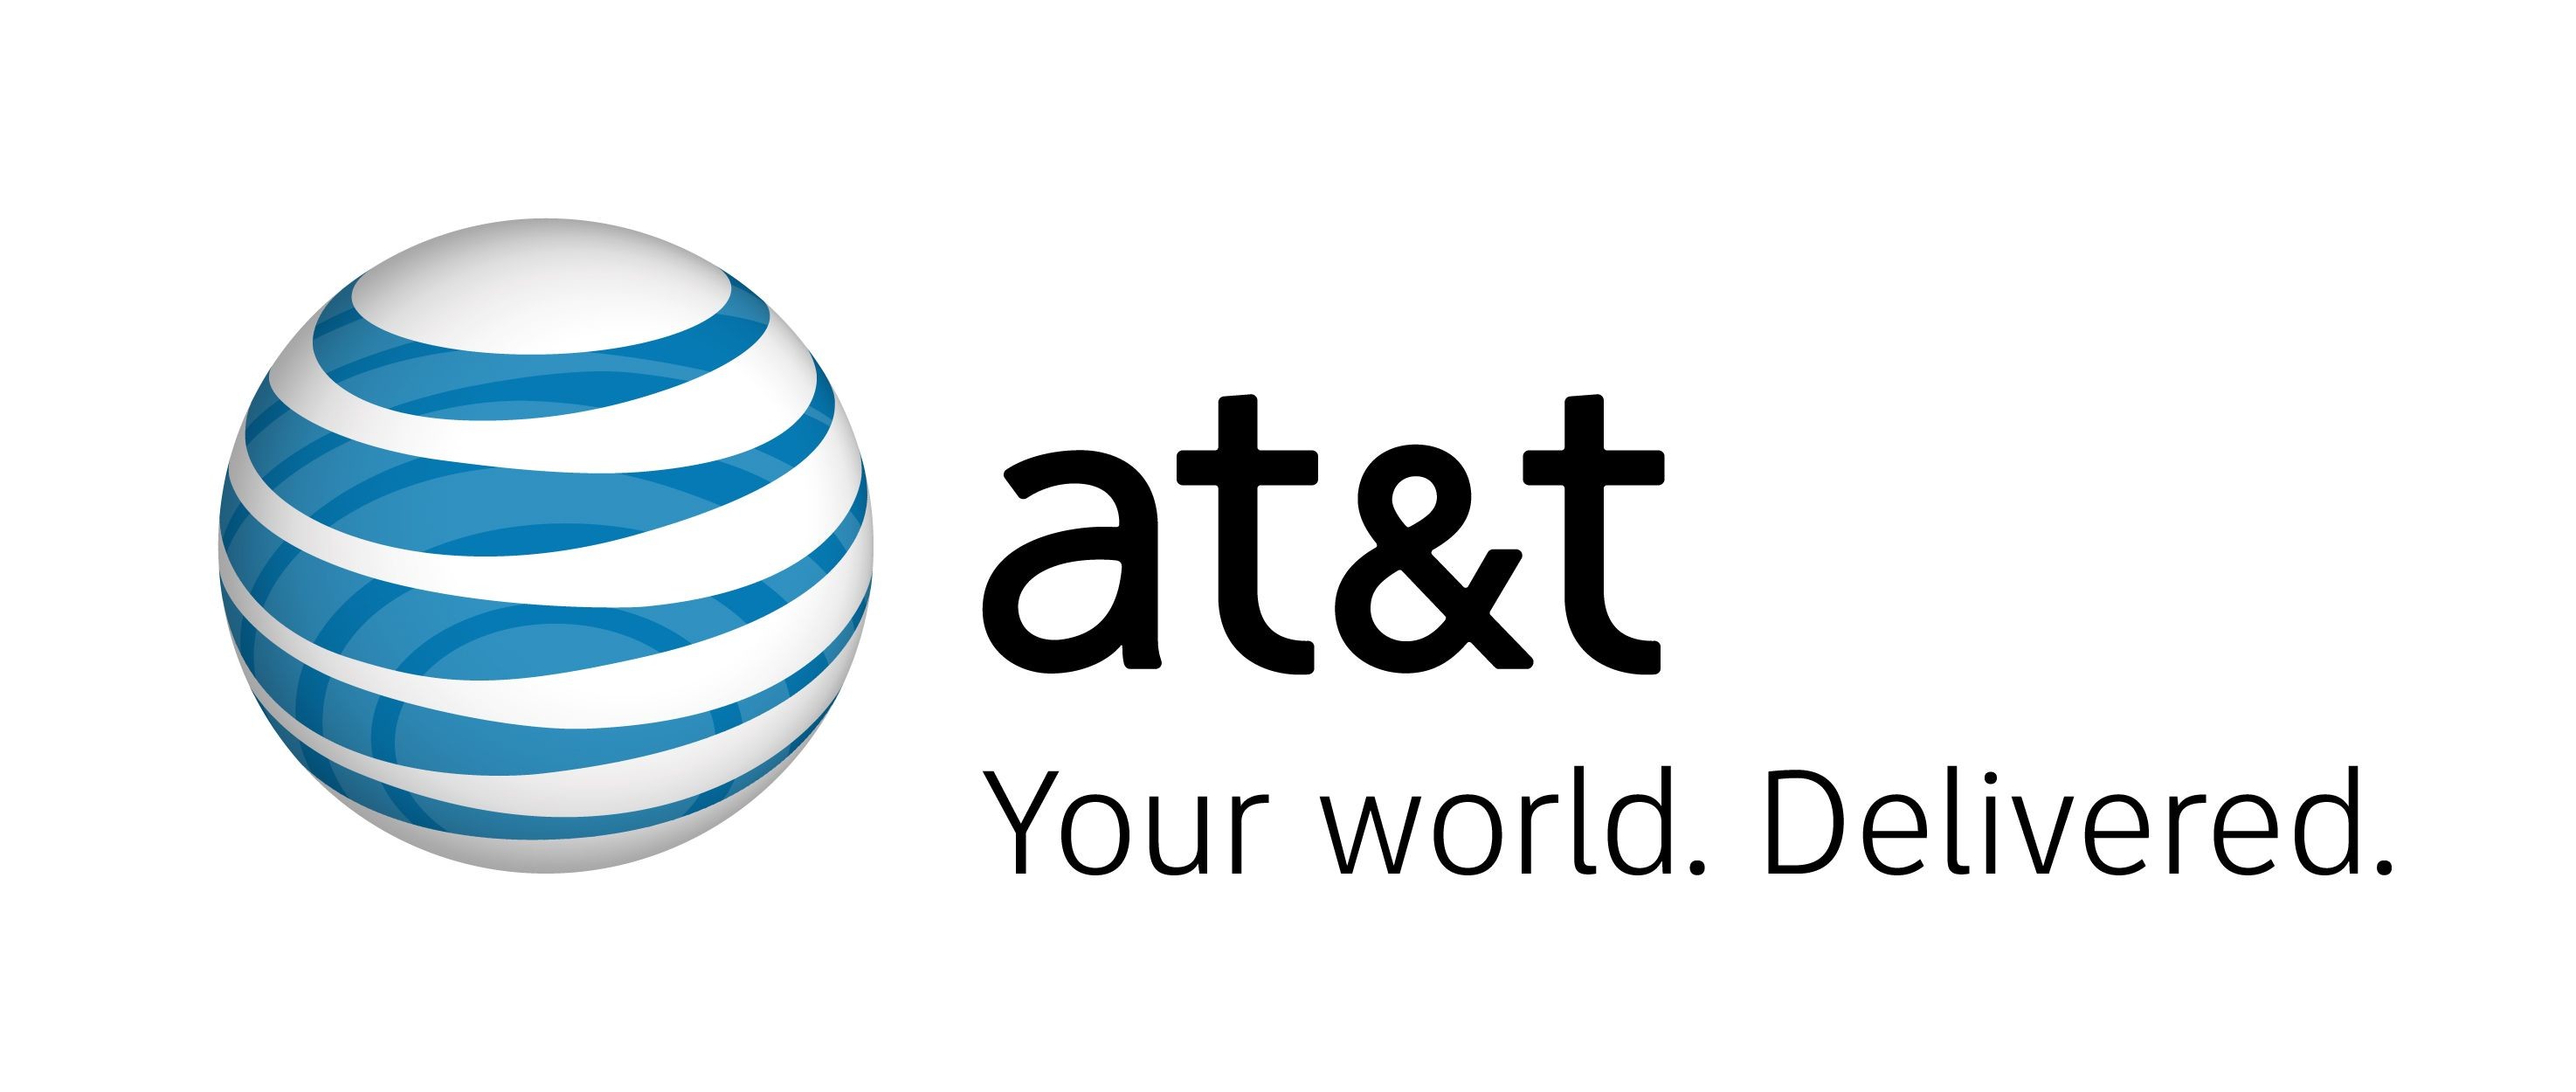 AT&T reportedly struggling to sell DirecTV at anything but a huge loss |  Ars Technica